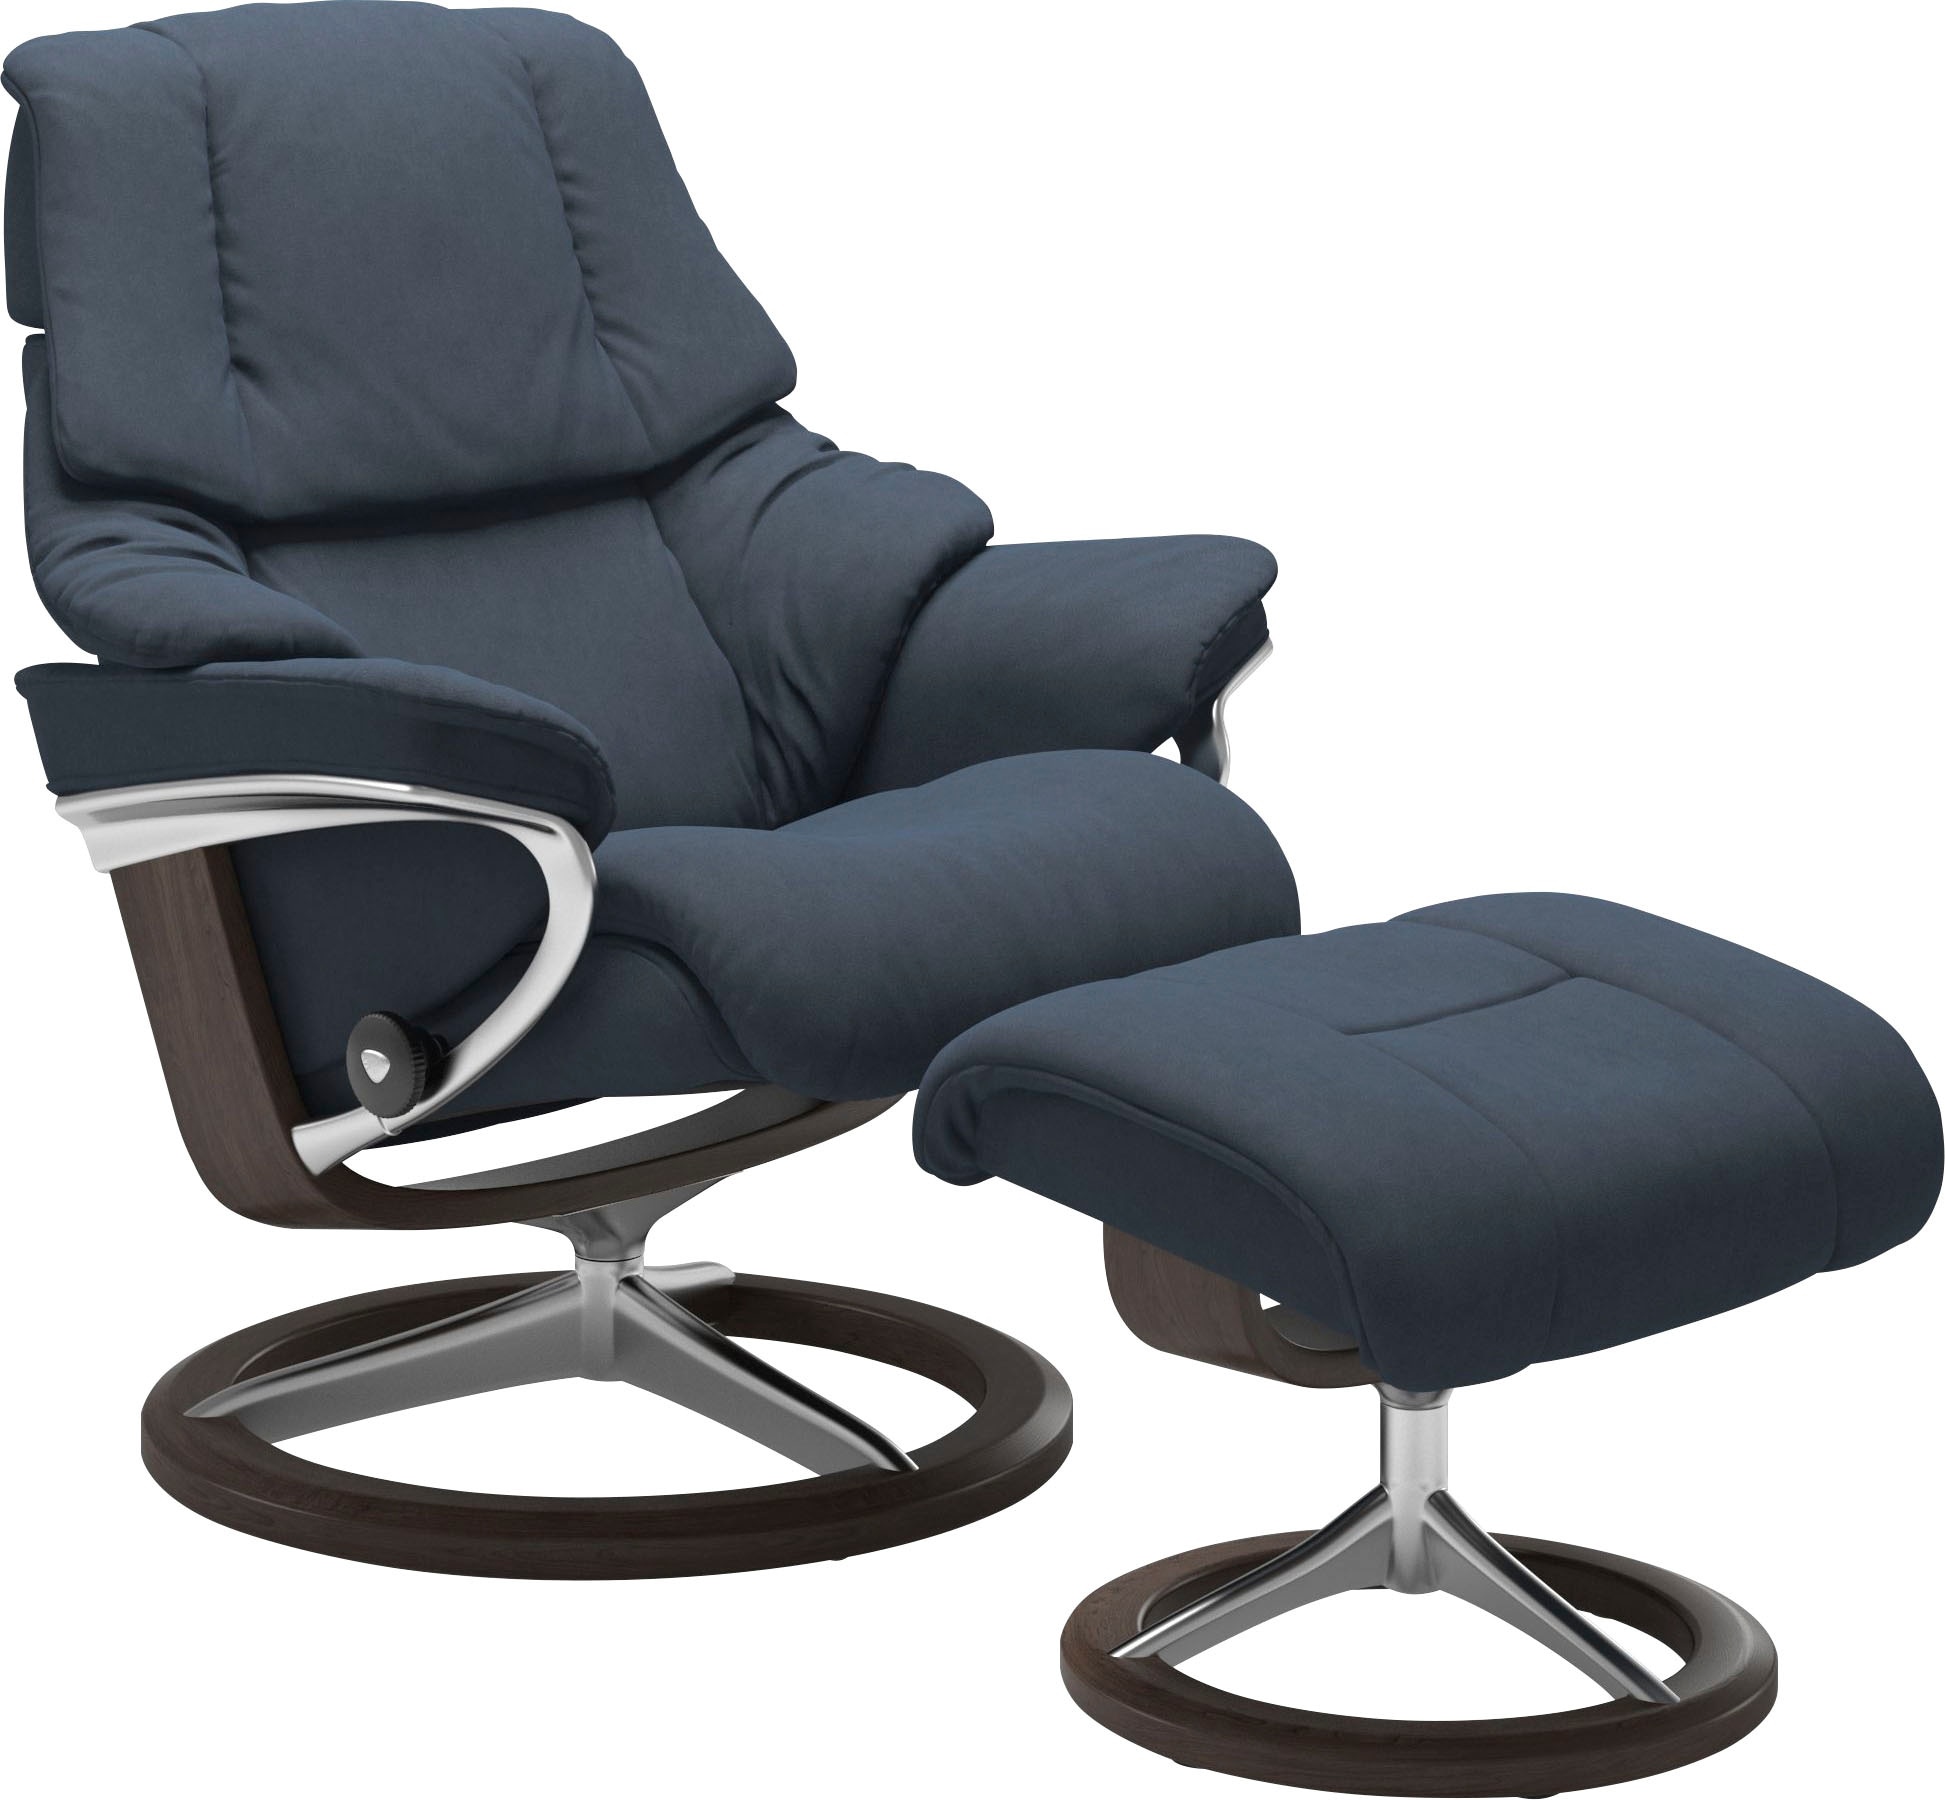 Relaxsessel STRESSLESS "Reno" Sessel Gr. Microfaser DINAMICA, Signature Base Wenge, Relaxfunktion-Drehfunktion-PlusTMSystem-Gleitsystem-BalanceAdaptTM, B/H/T: 83 cm x 100 cm x 76 cm, blau (blue dinamica) Lesesessel und Relaxsessel